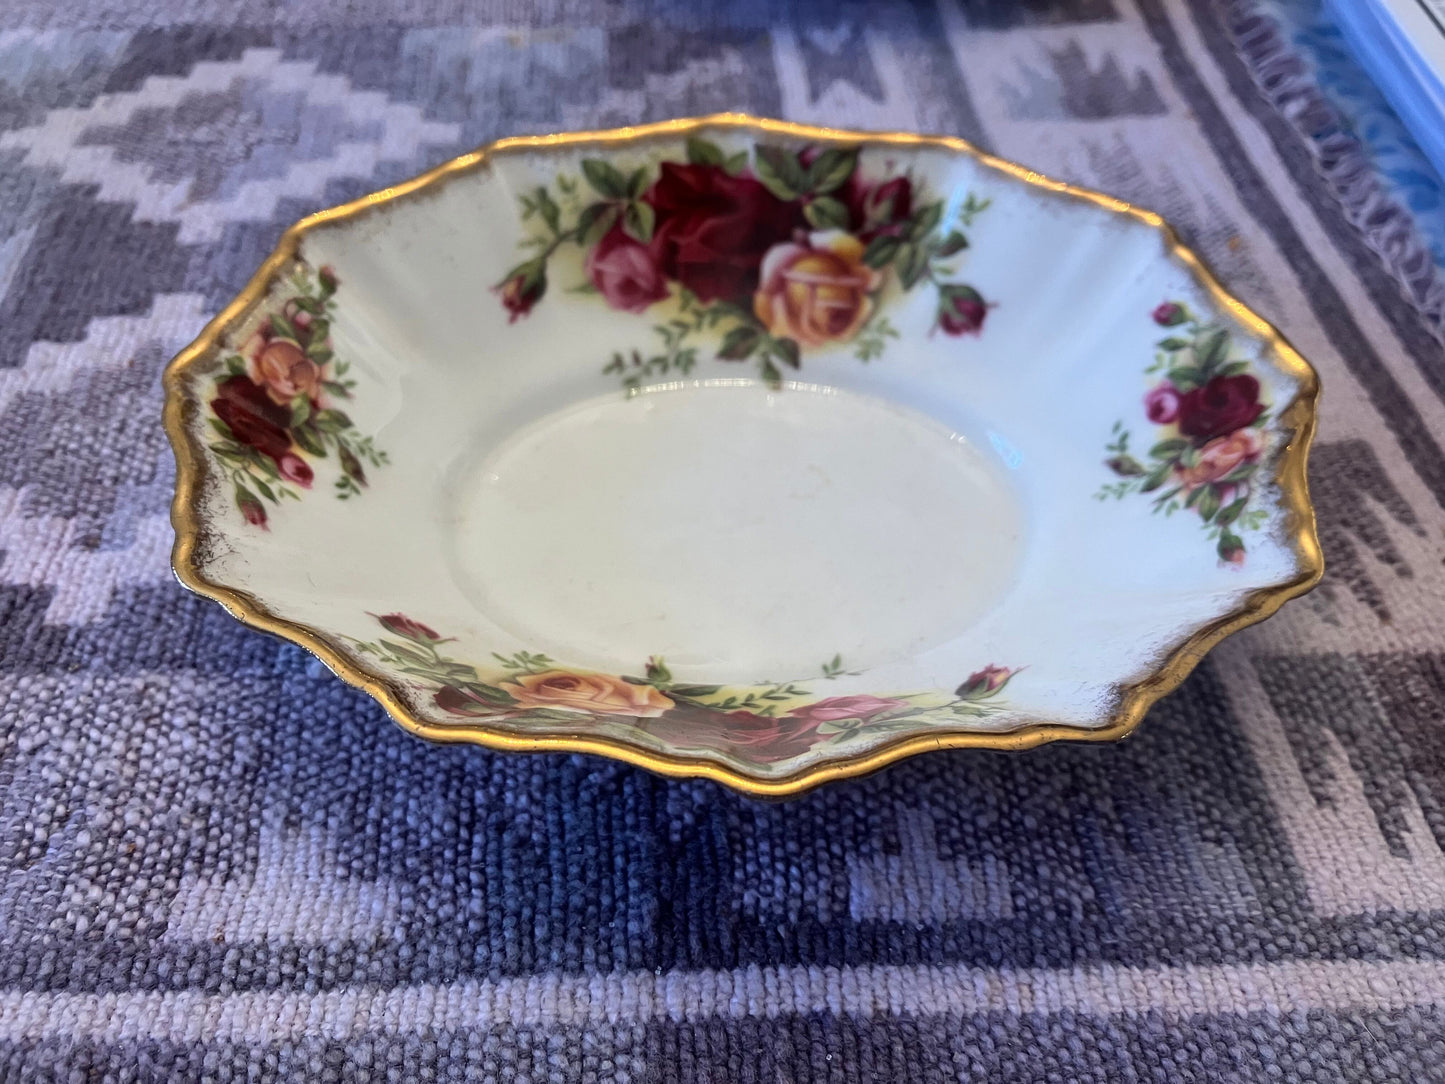 Royal Albert Old Country Roses Bone China Teacup and Saucer